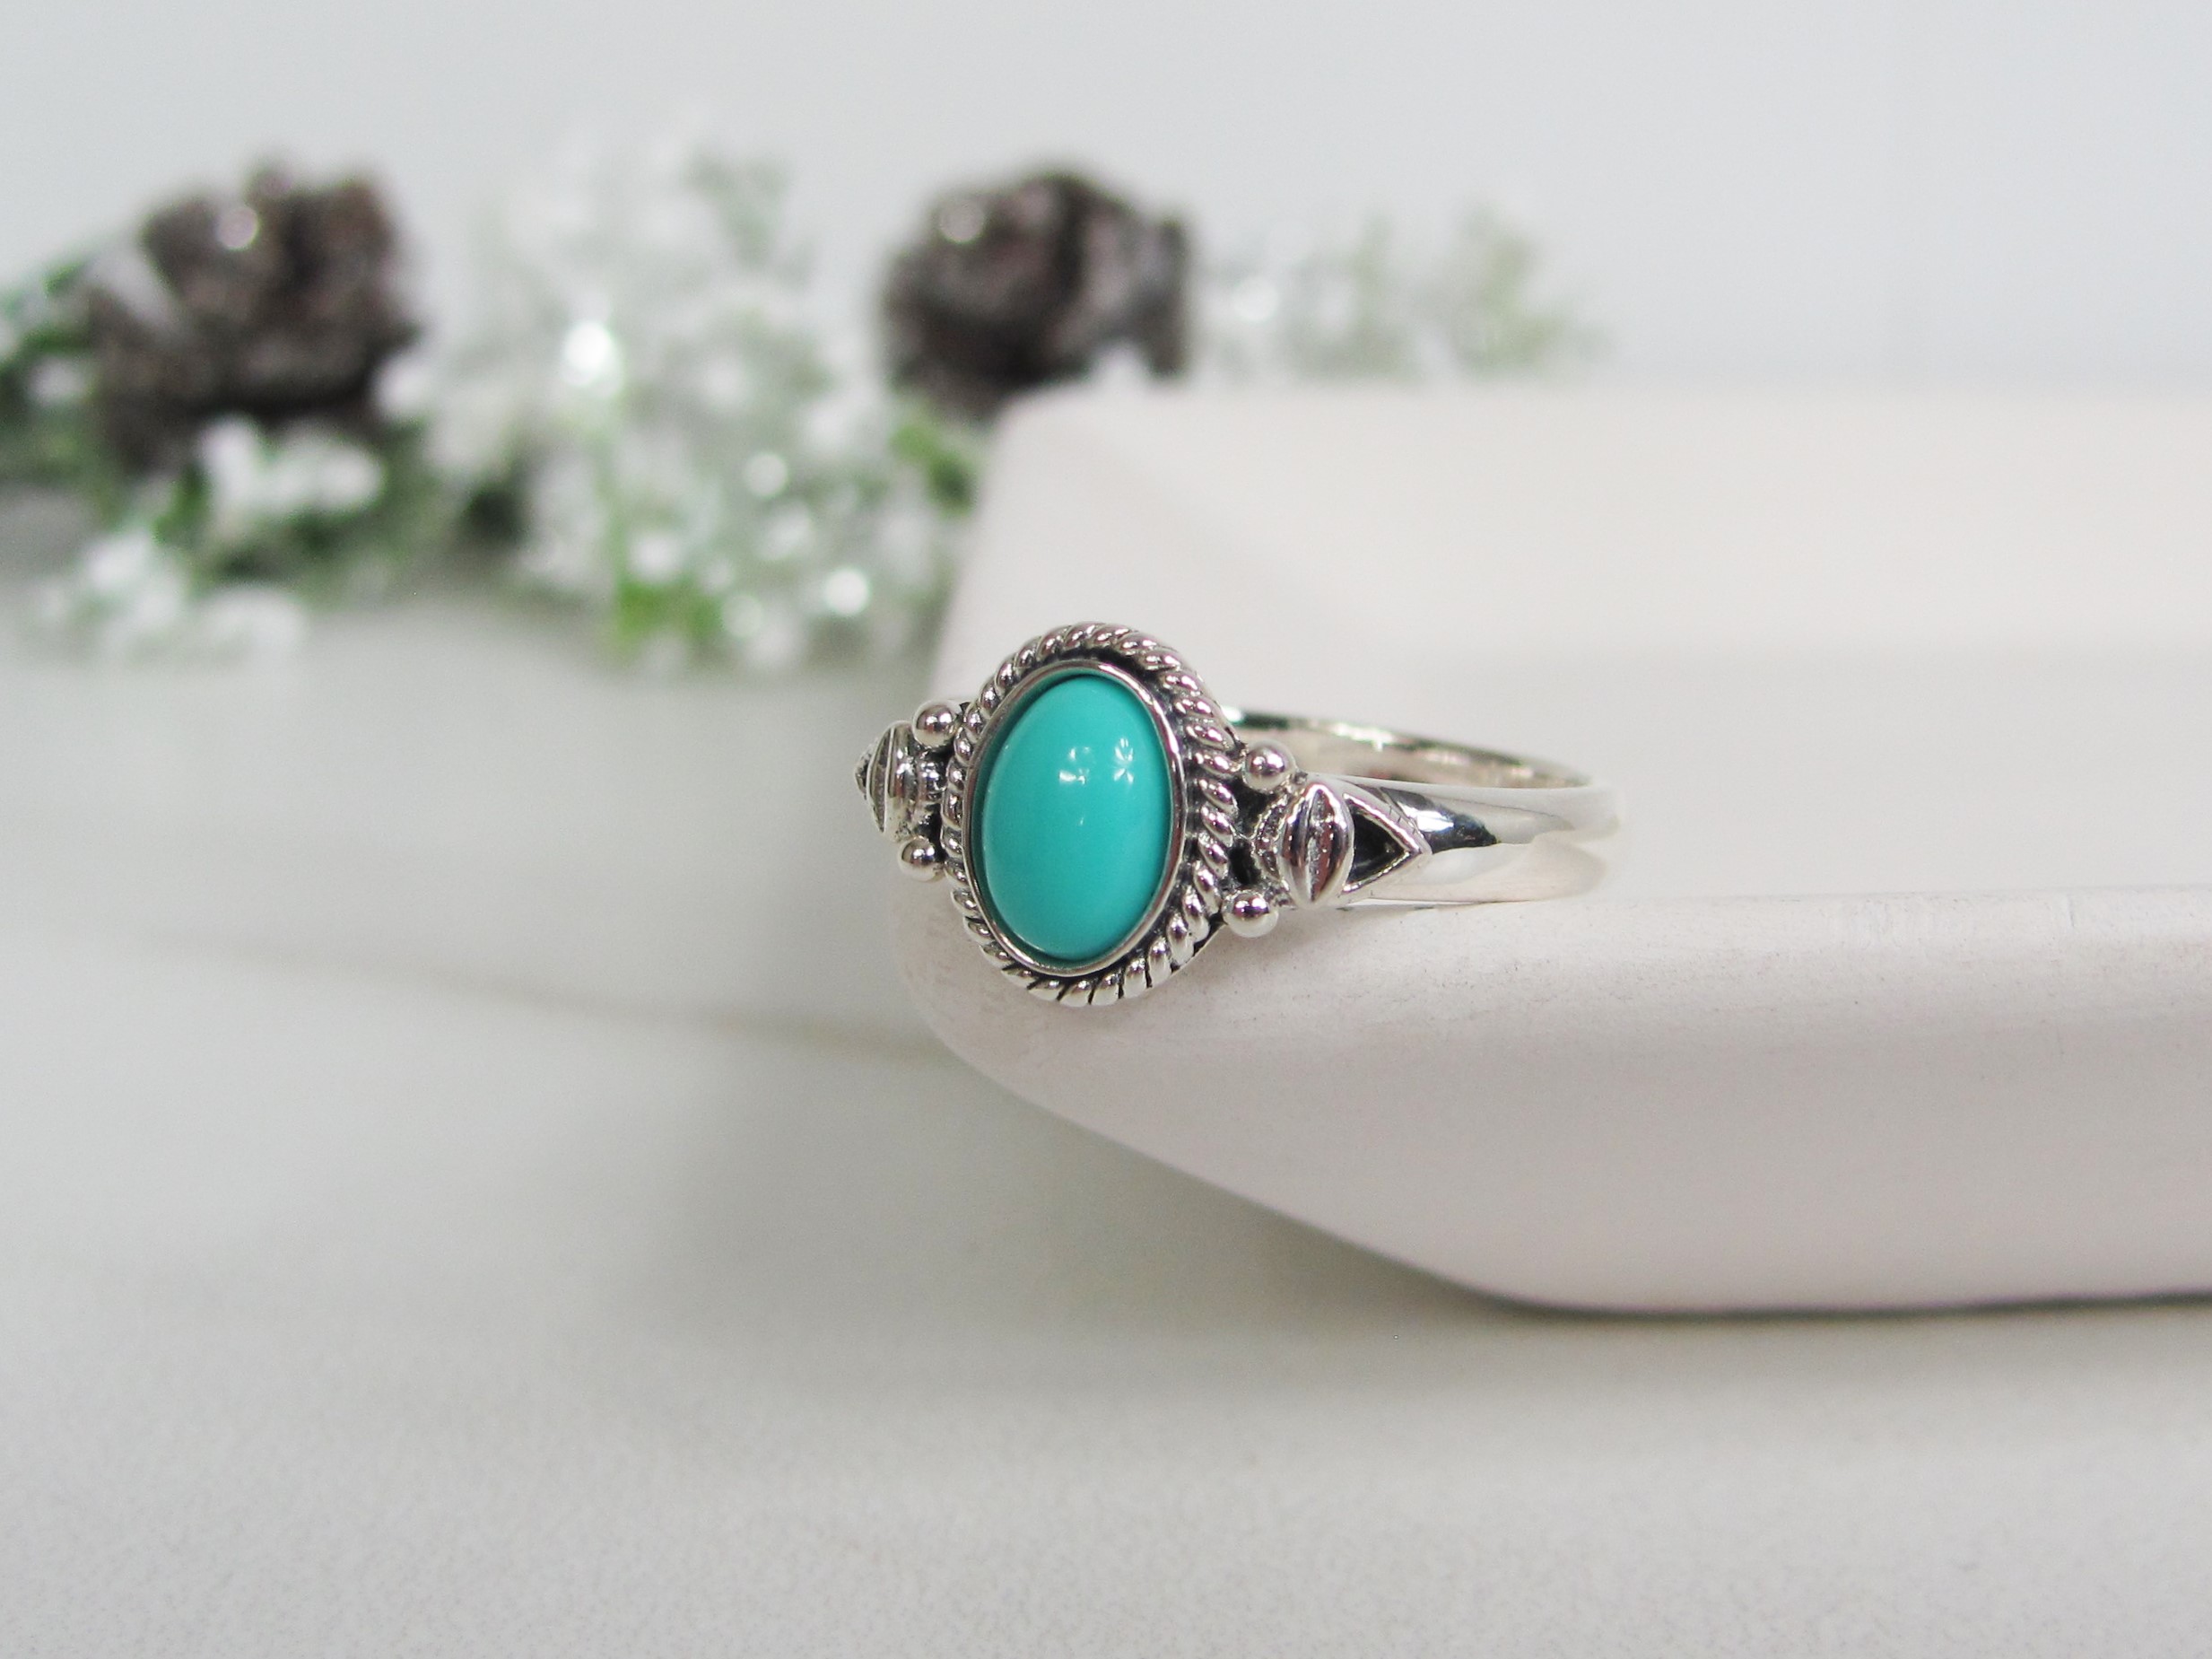 Arizona Turquoise Ring in Sterling Silver